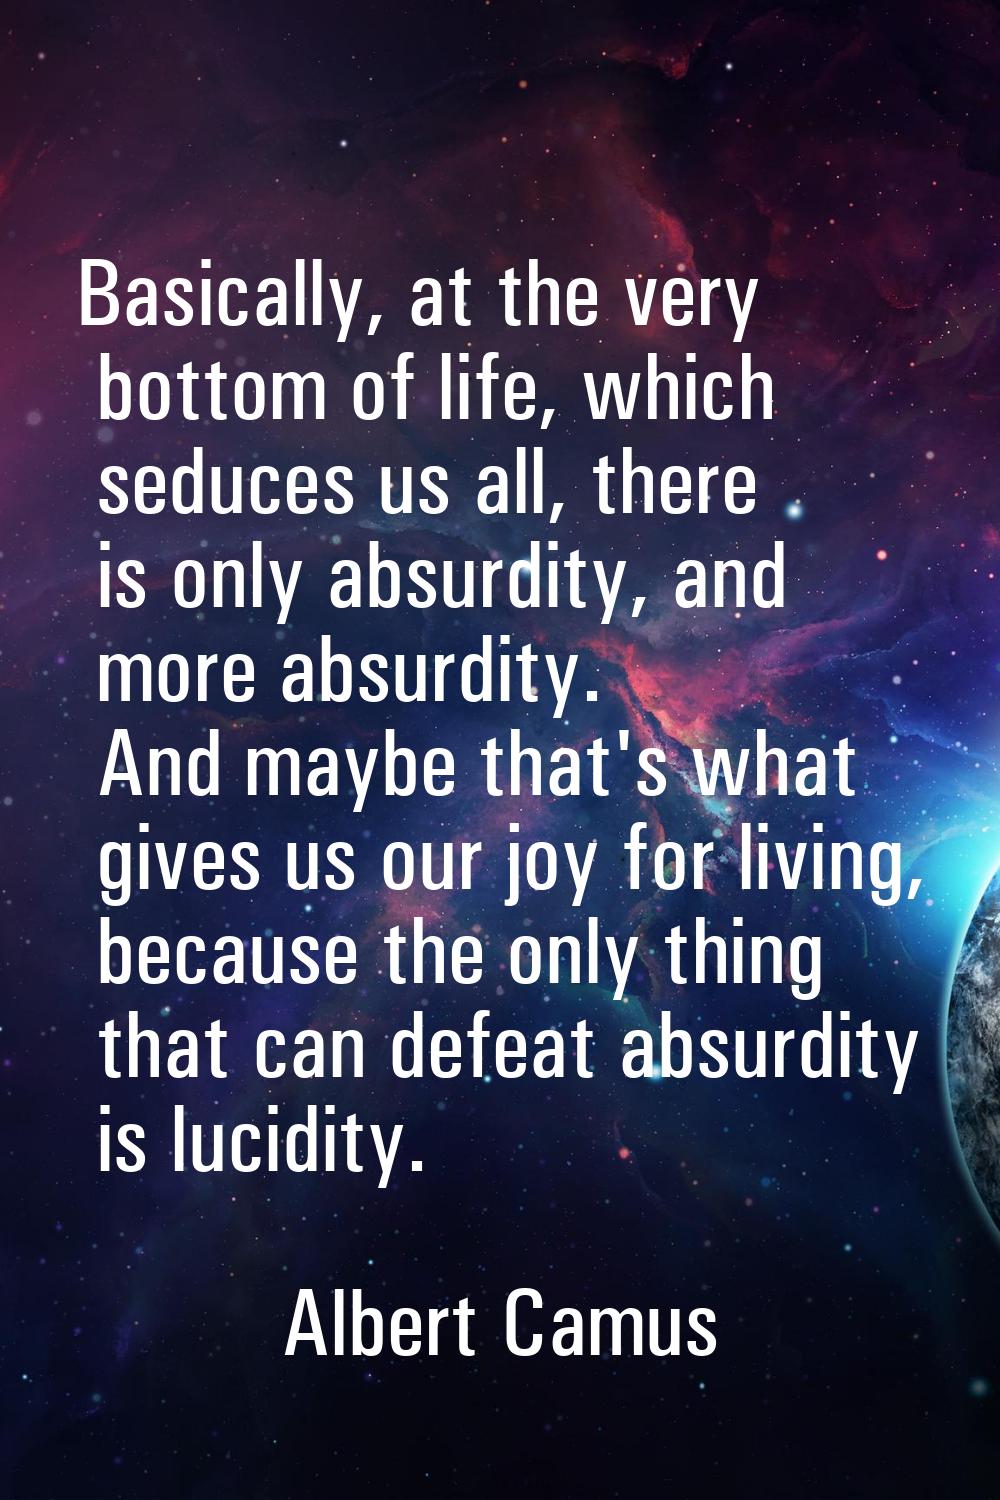 Basically, at the very bottom of life, which seduces us all, there is only absurdity, and more absu